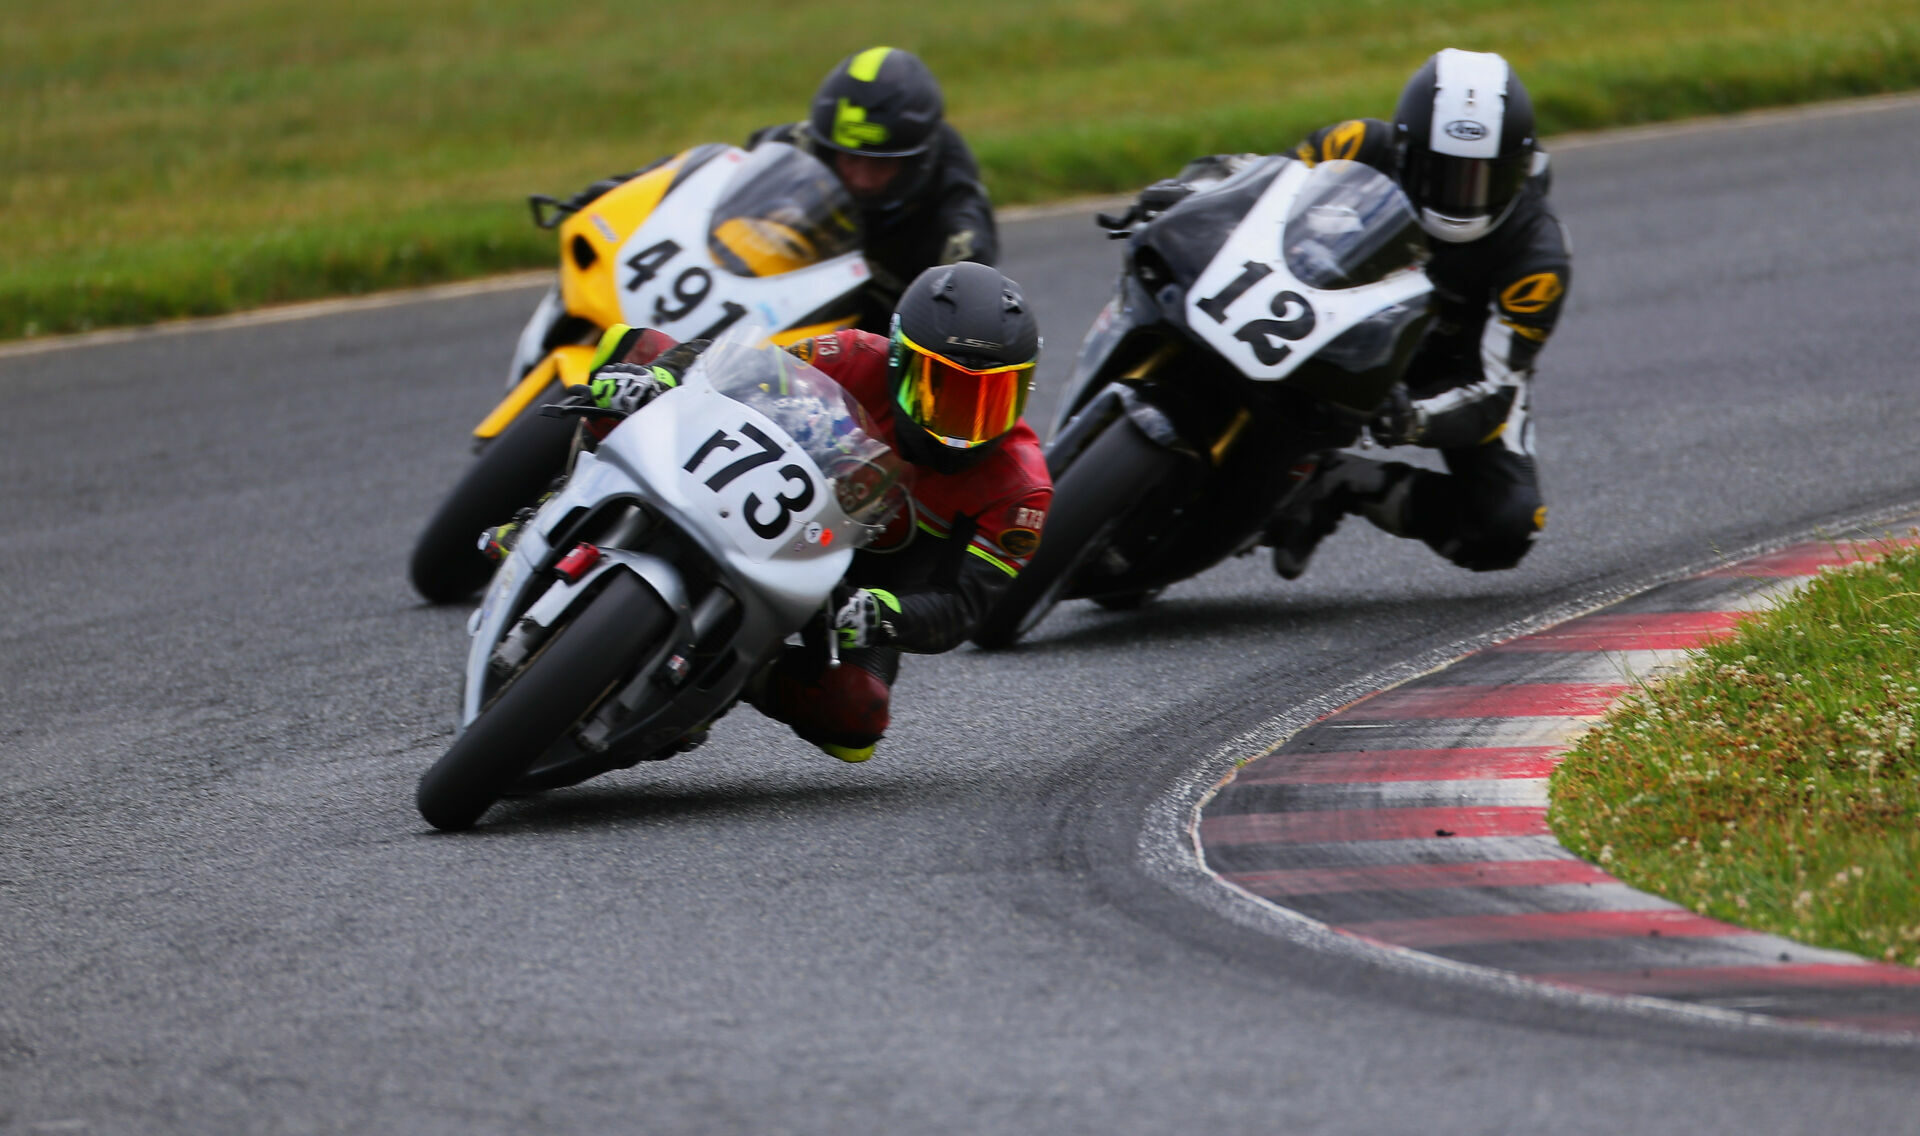 Greg Glevicky (r73), Adrian Jasso (12), and Frank Schoenbeck (491) battle for podium positions in an AHRMA Open Two-Stroke race at New Jersey Motorsports Park. Photo by etechphoto.com, courtesy AHRMA.